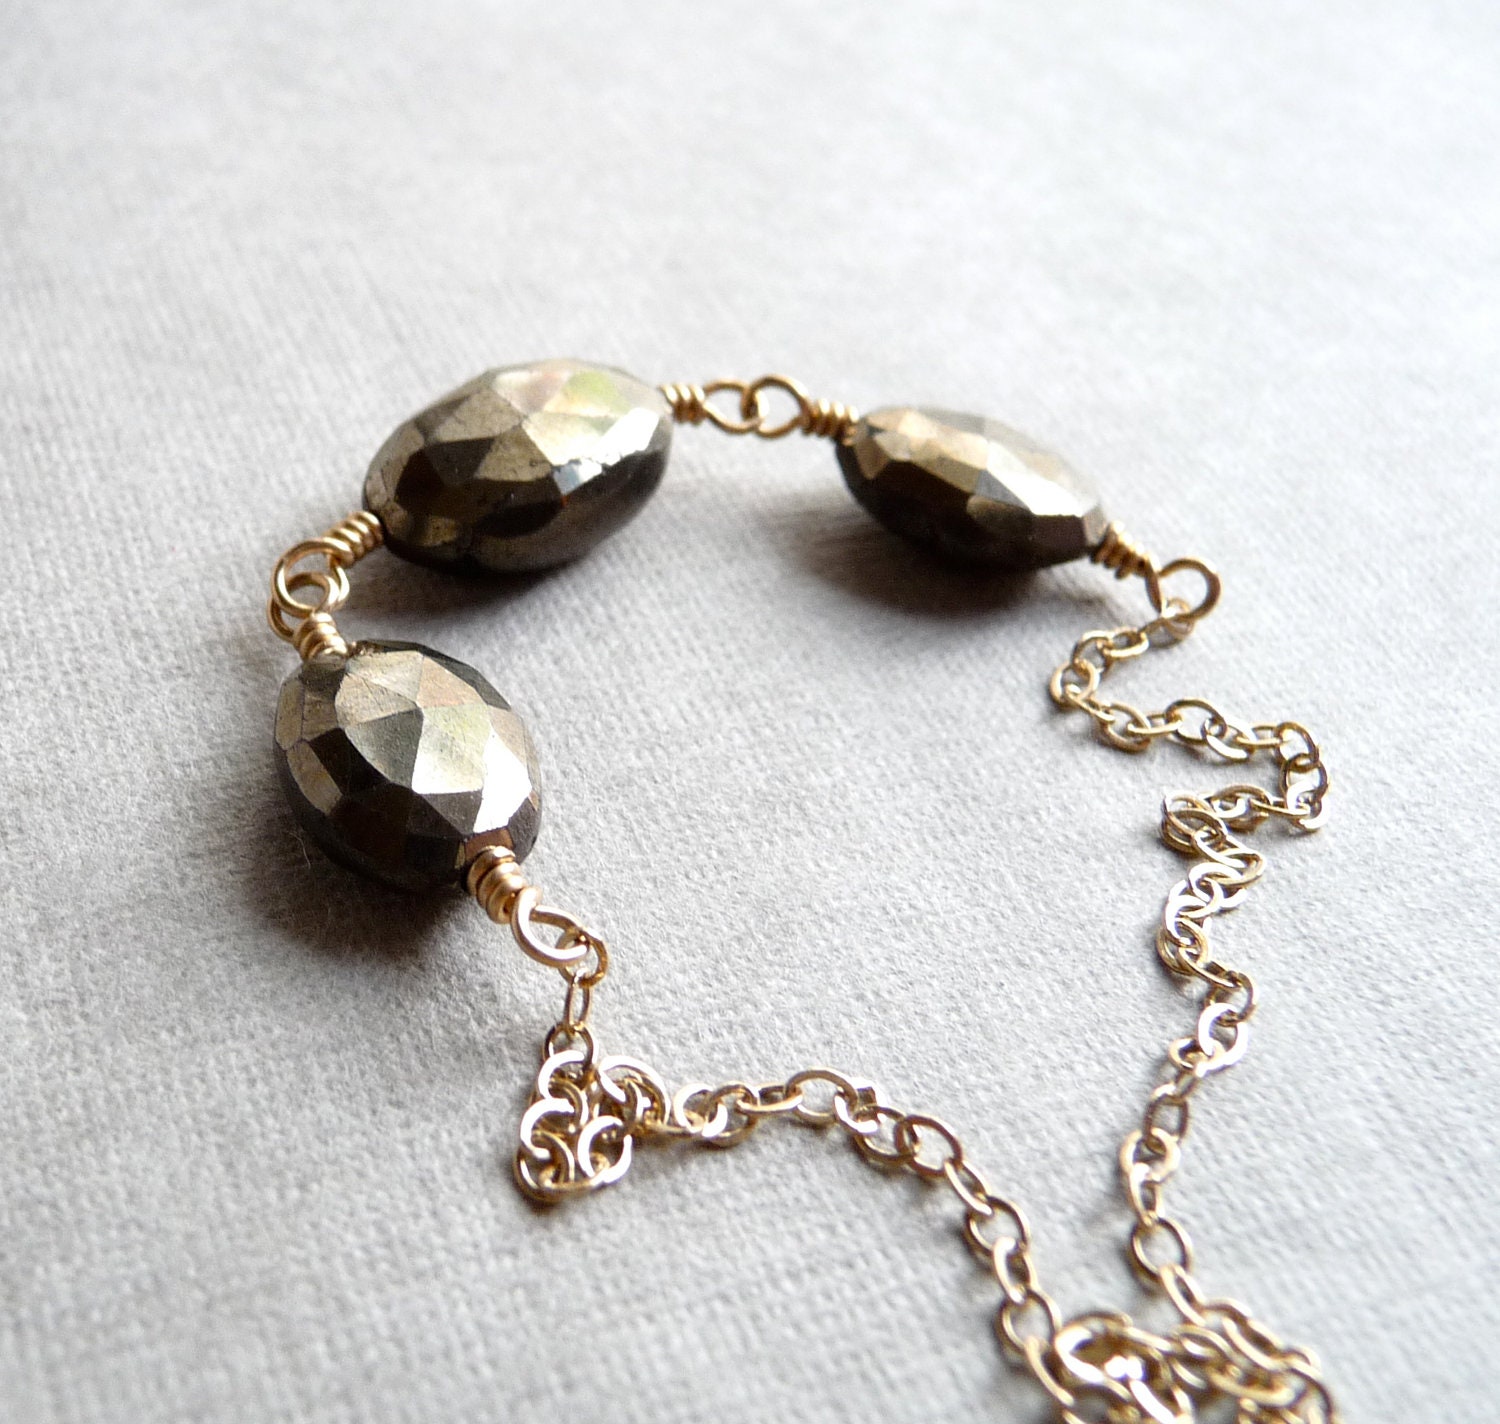 Pyrite Necklace, Faceted Pyrite Oval Necklace, Fools Gold Gemstone, Gold Filled Chain Necklace, Under 50 - karinagracejewelry